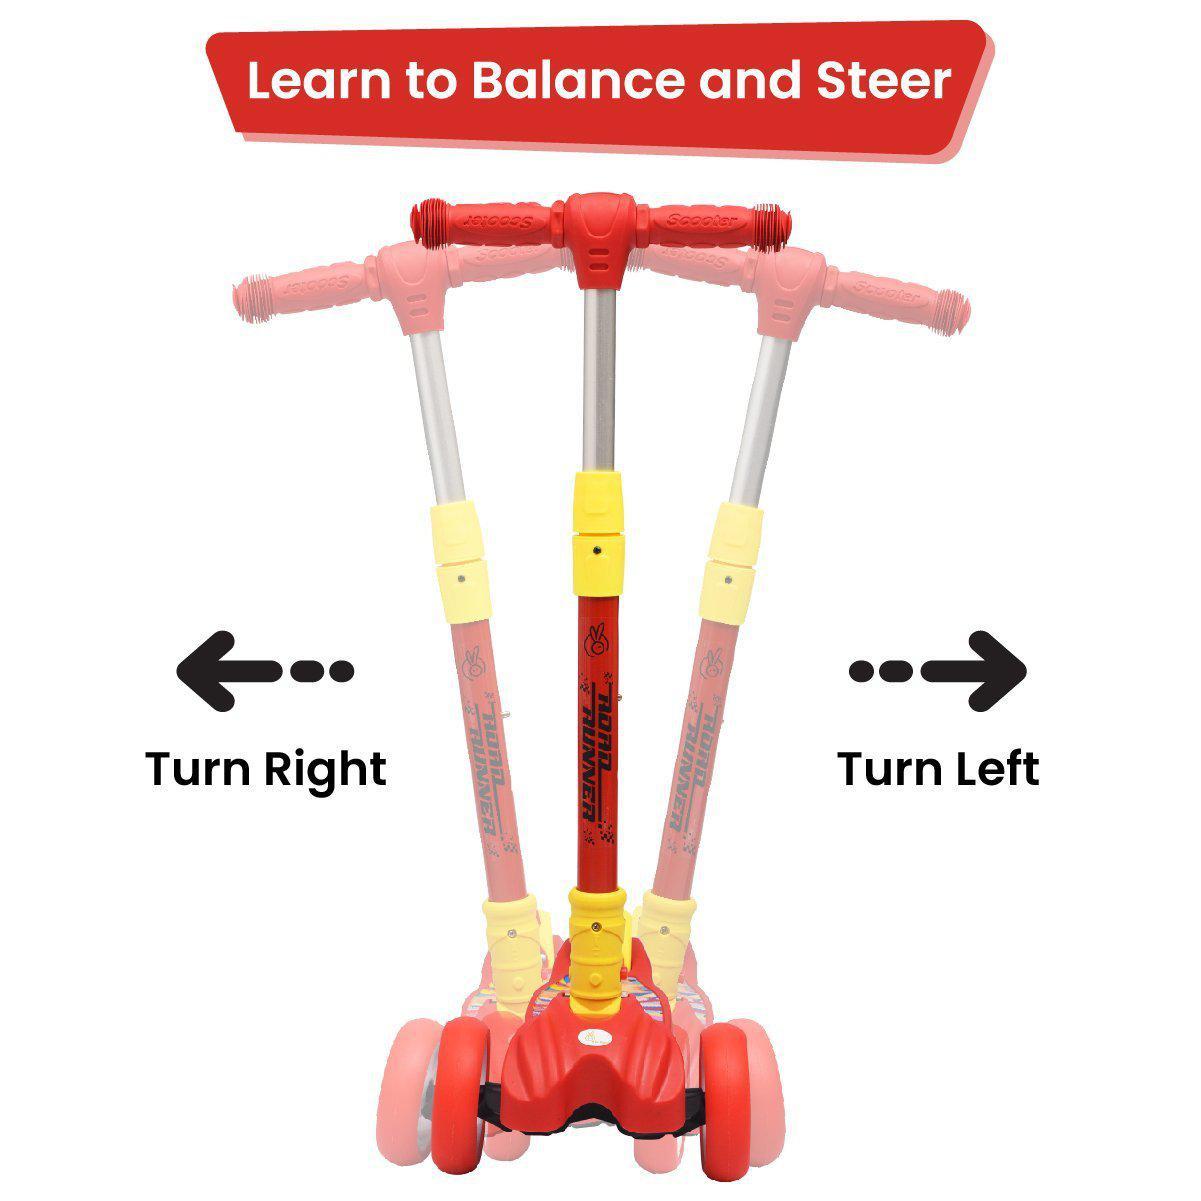 Road Runner Scooter for Kids - The Smart Kick Scooter (Red) | R for Rabbit